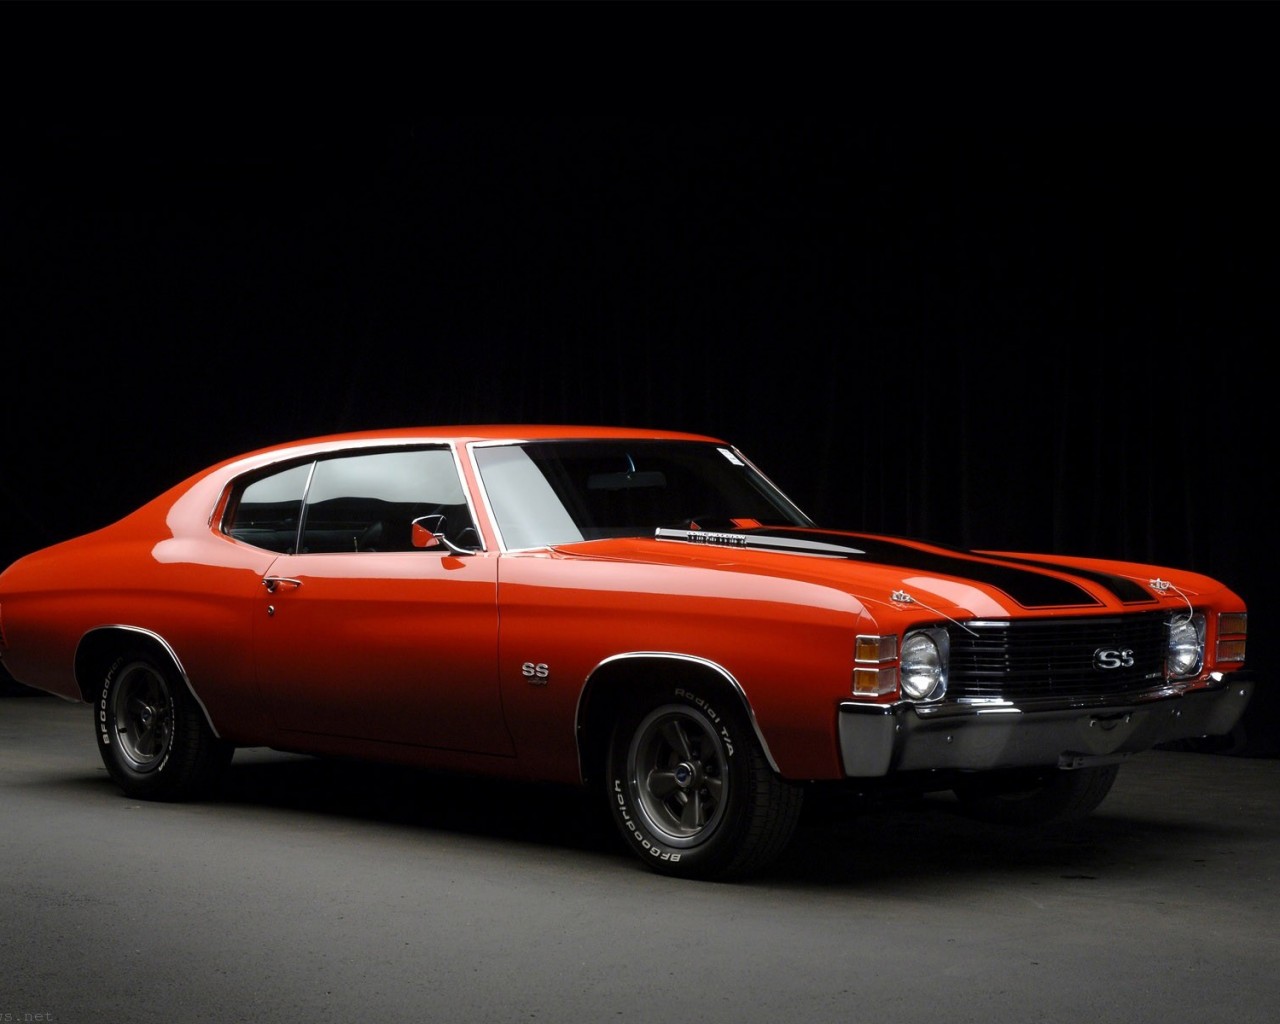 Chevy Muscle Car Wallpaper HD In Cars Imageci